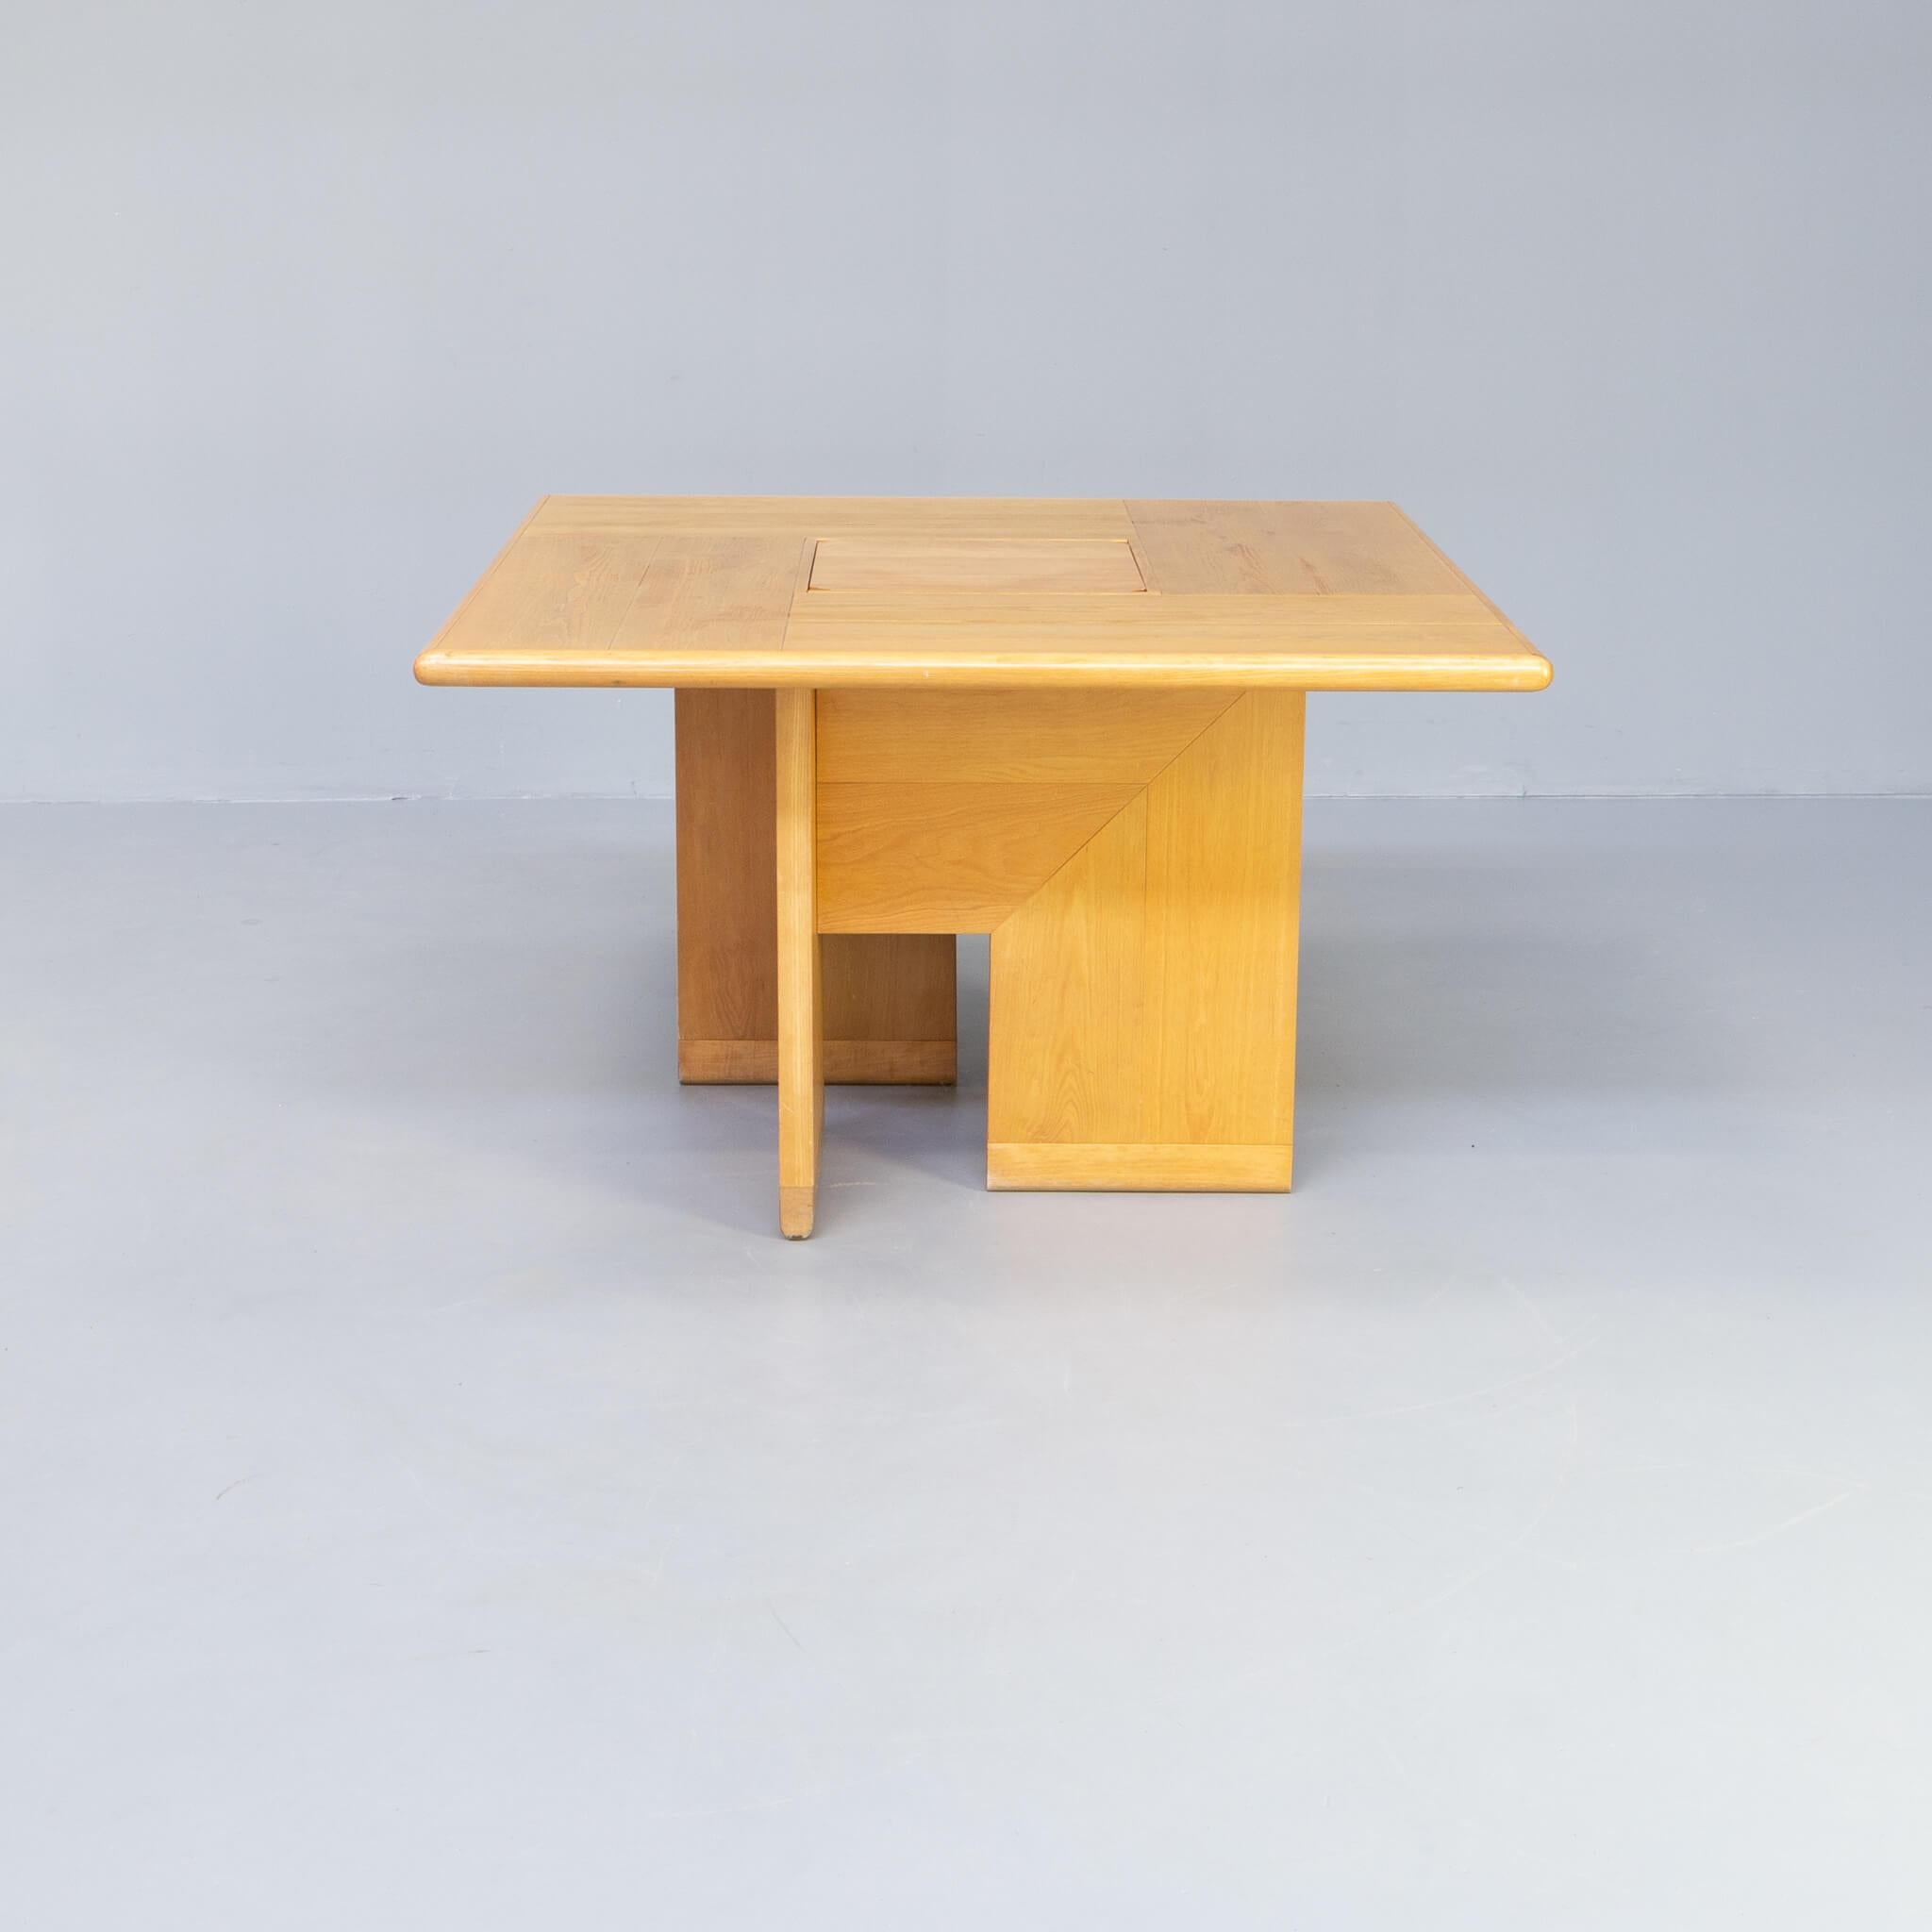 This square dining table has a remarkable wooden lined foot that consists of four beautifully lined wooden elements, carried on 1 rounded wooden bar, that all four fit together with a for that time progressive metal click system. The four parts